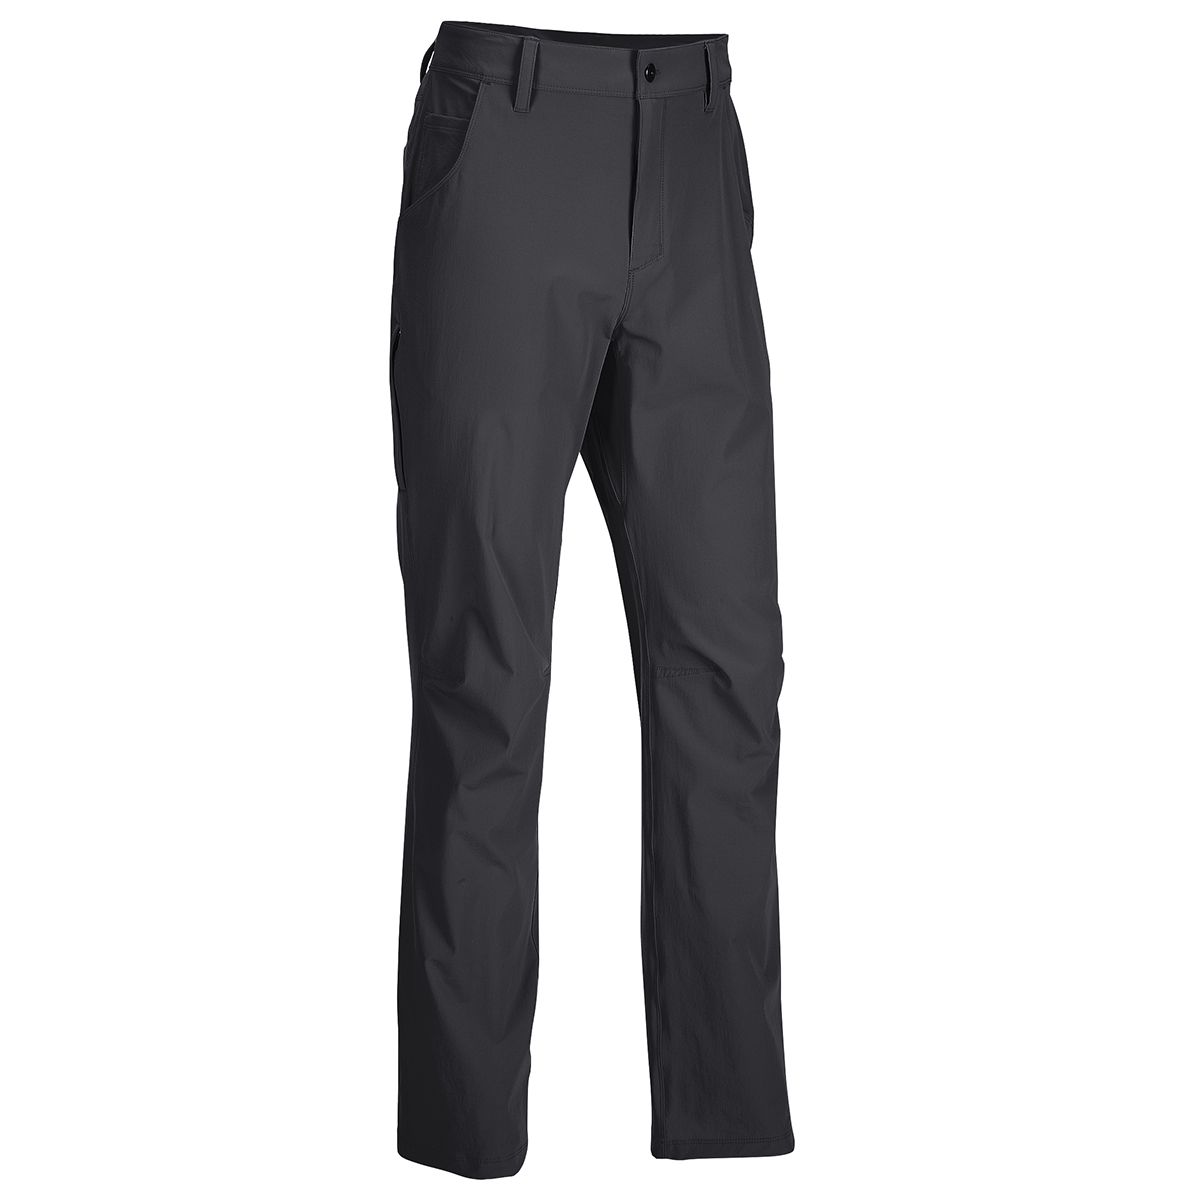 40% OFF EMS Fencemender & Compass Pants - Eastern Mountain Sports Email  Archive